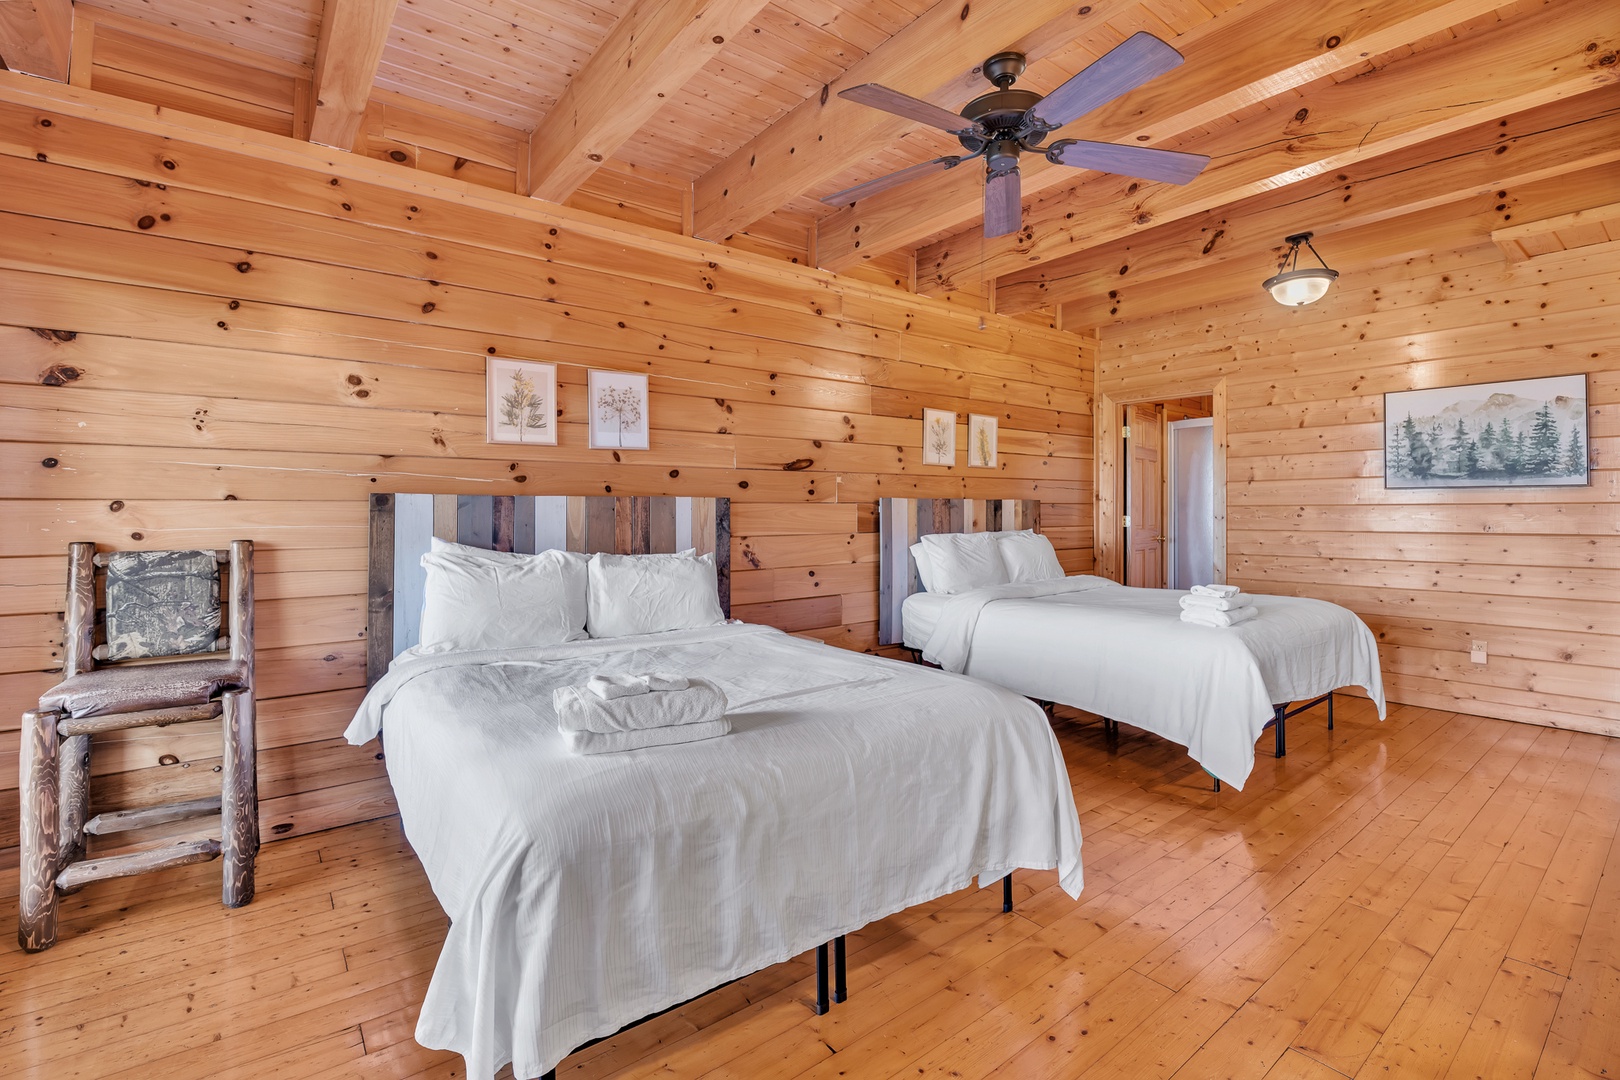 The 4th bedroom offers a pair of queen beds, private en suite, TV, & balcony